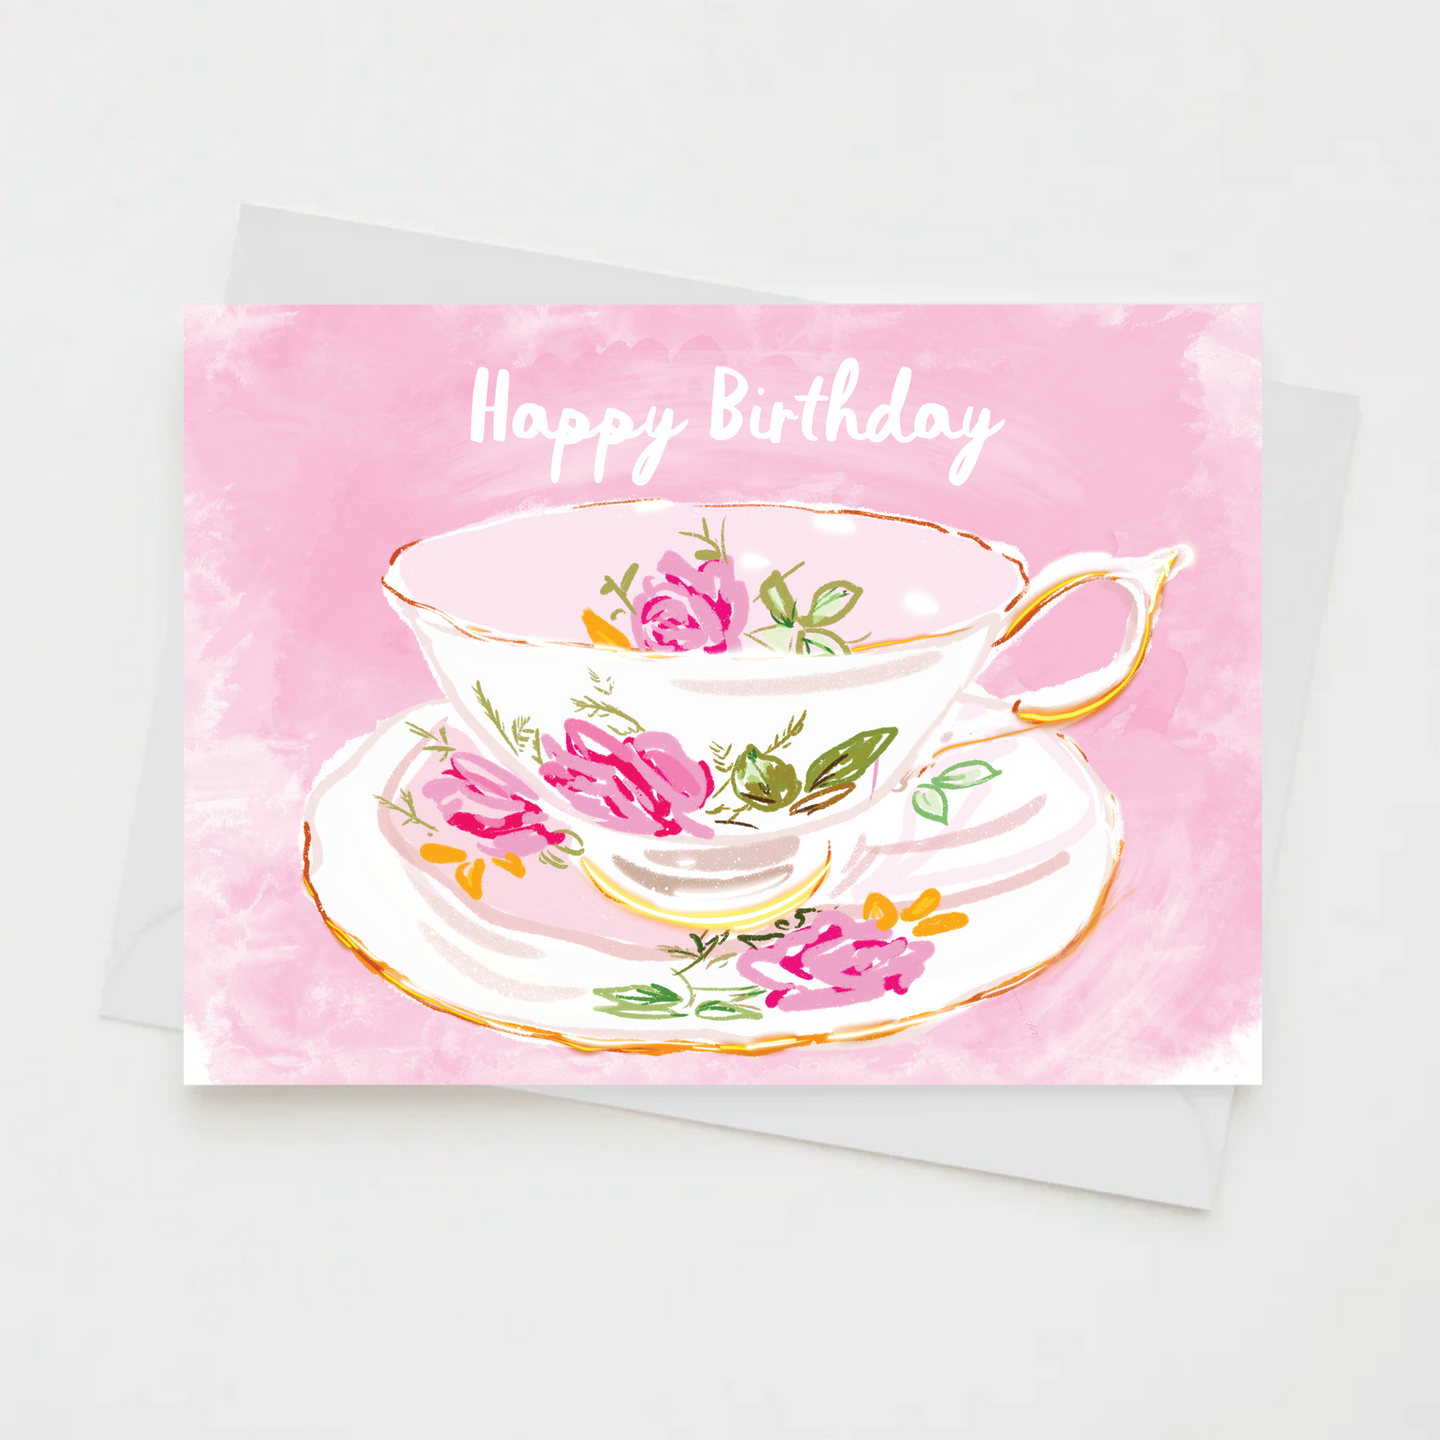 Your Cup of Tea Birthday Greeting Card